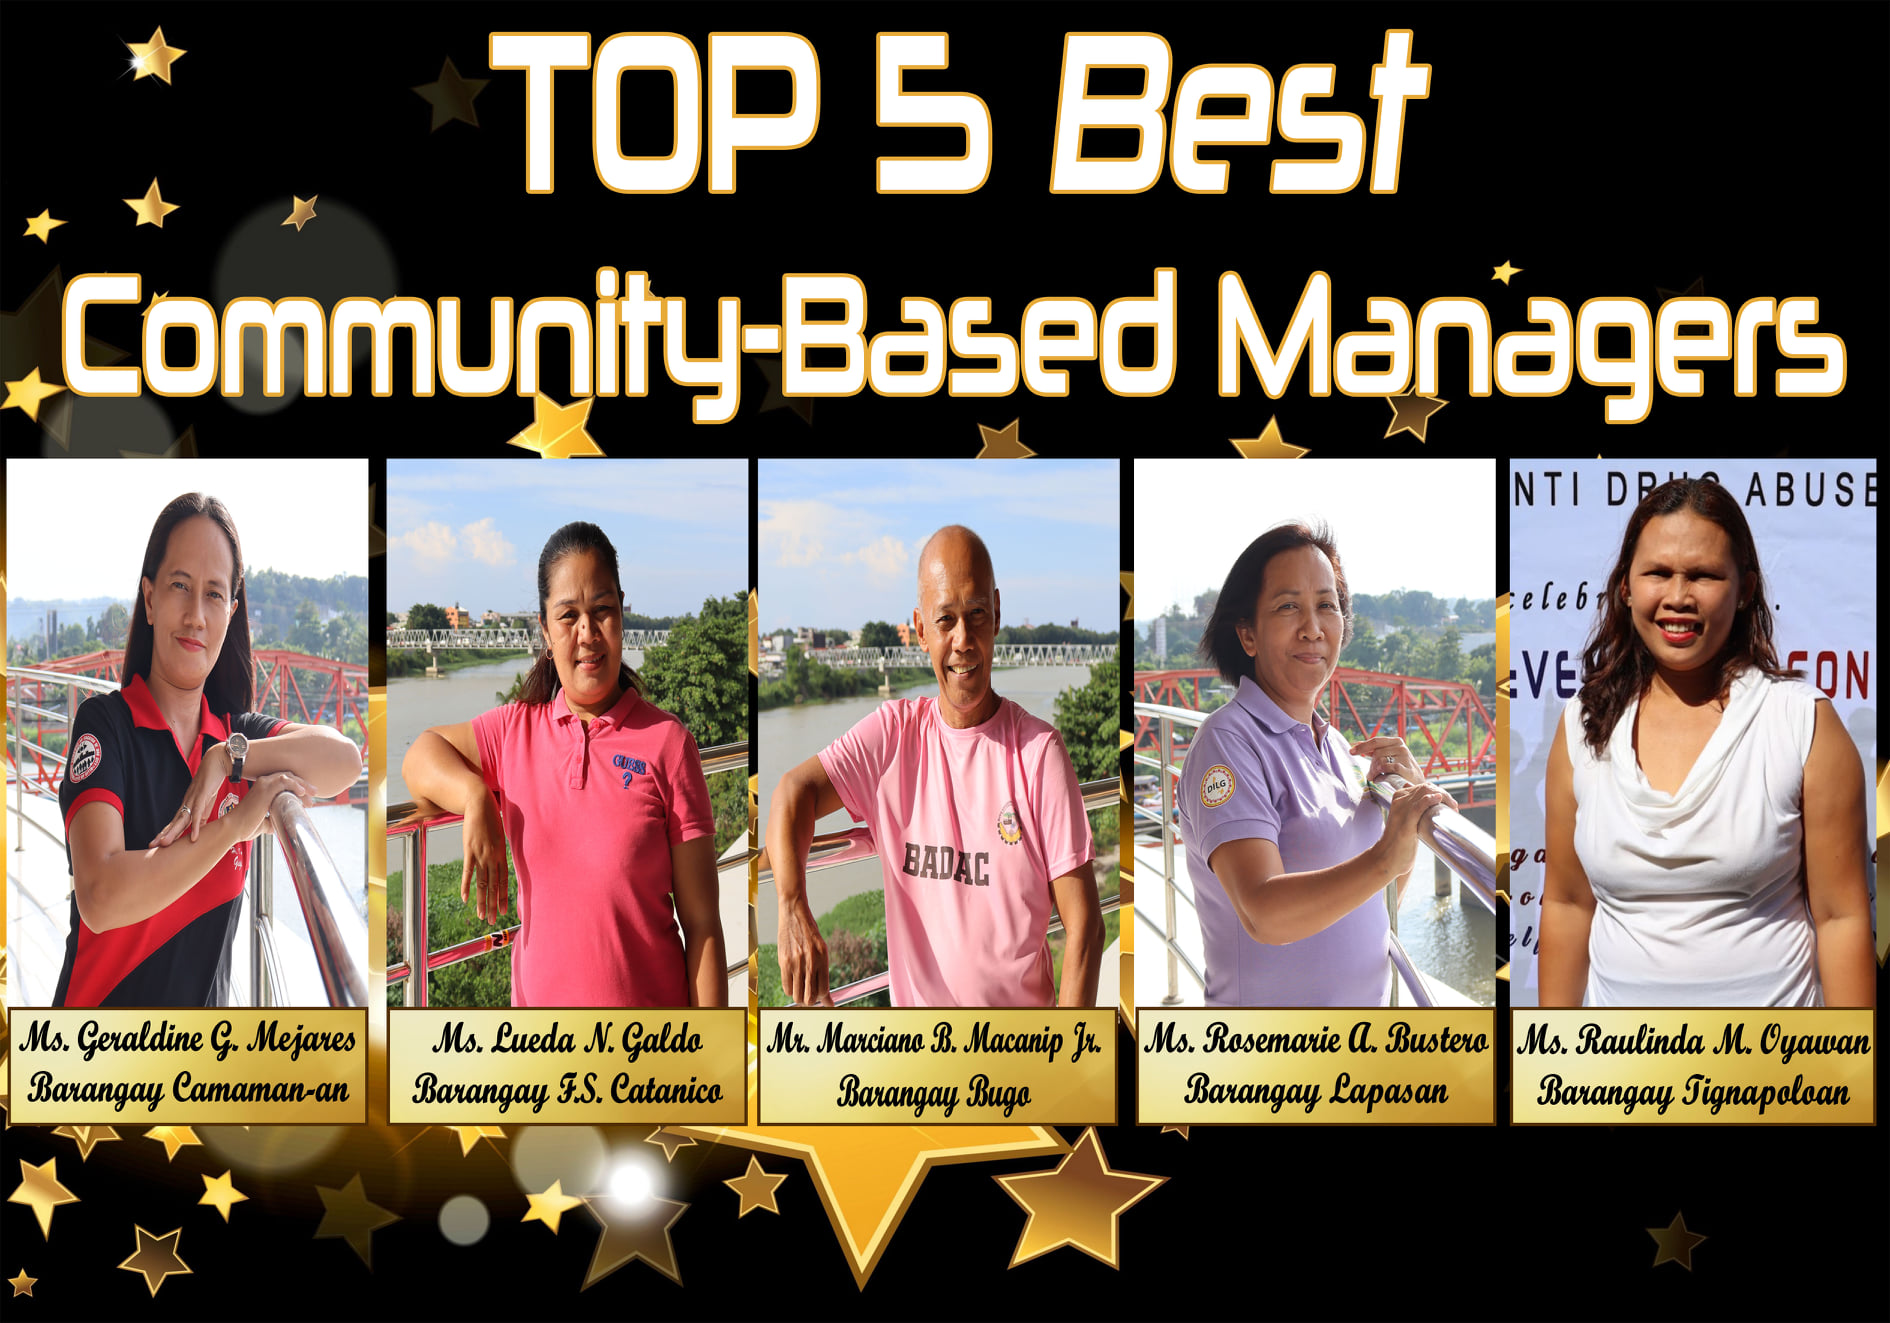 Top 5 Best Community Based Managers